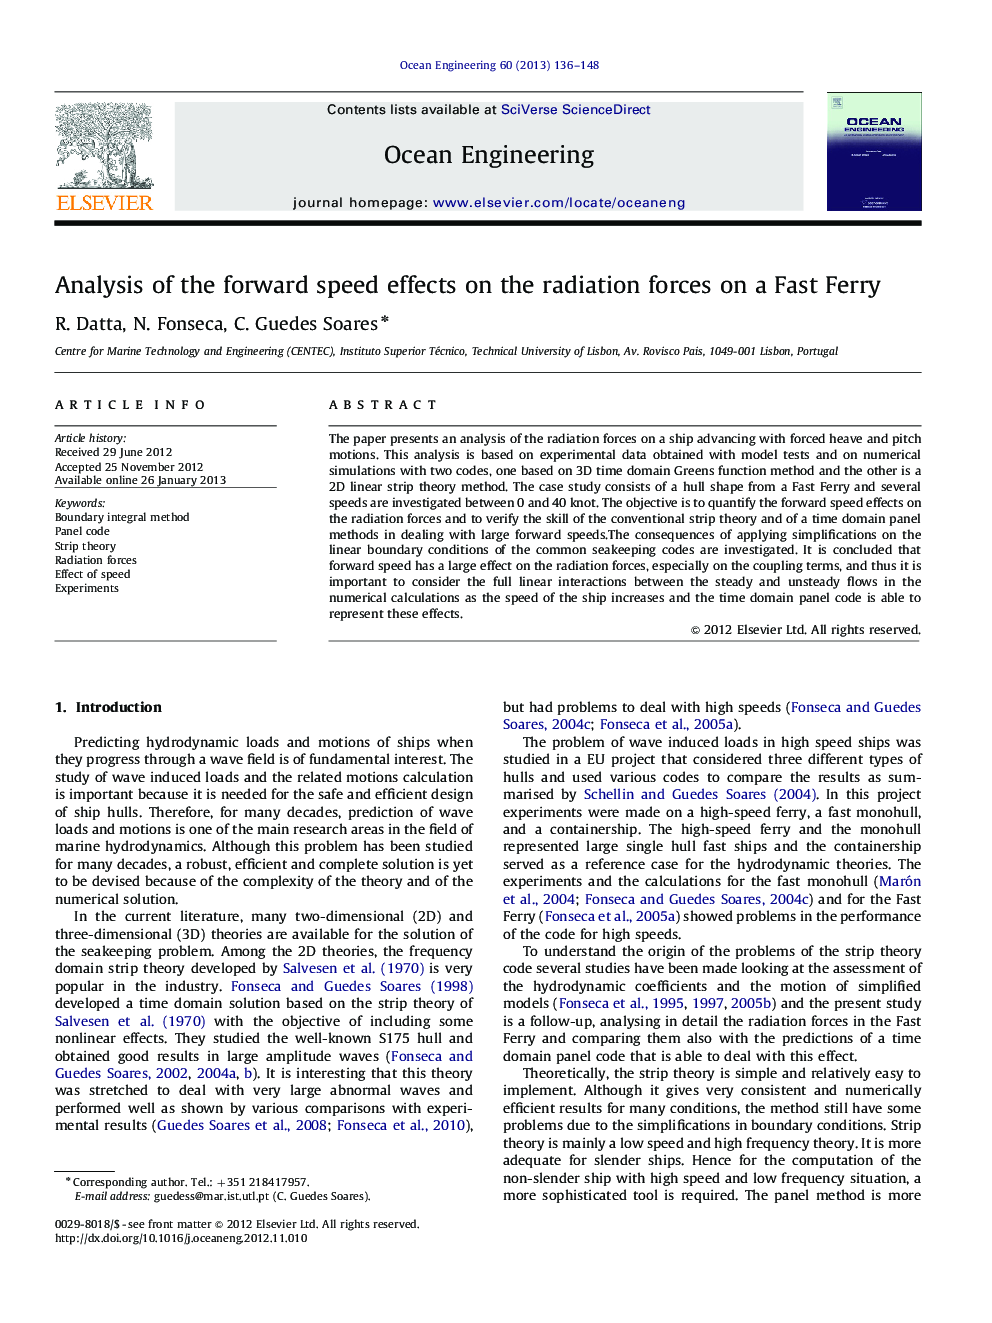 Analysis of the forward speed effects on the radiation forces on a Fast Ferry